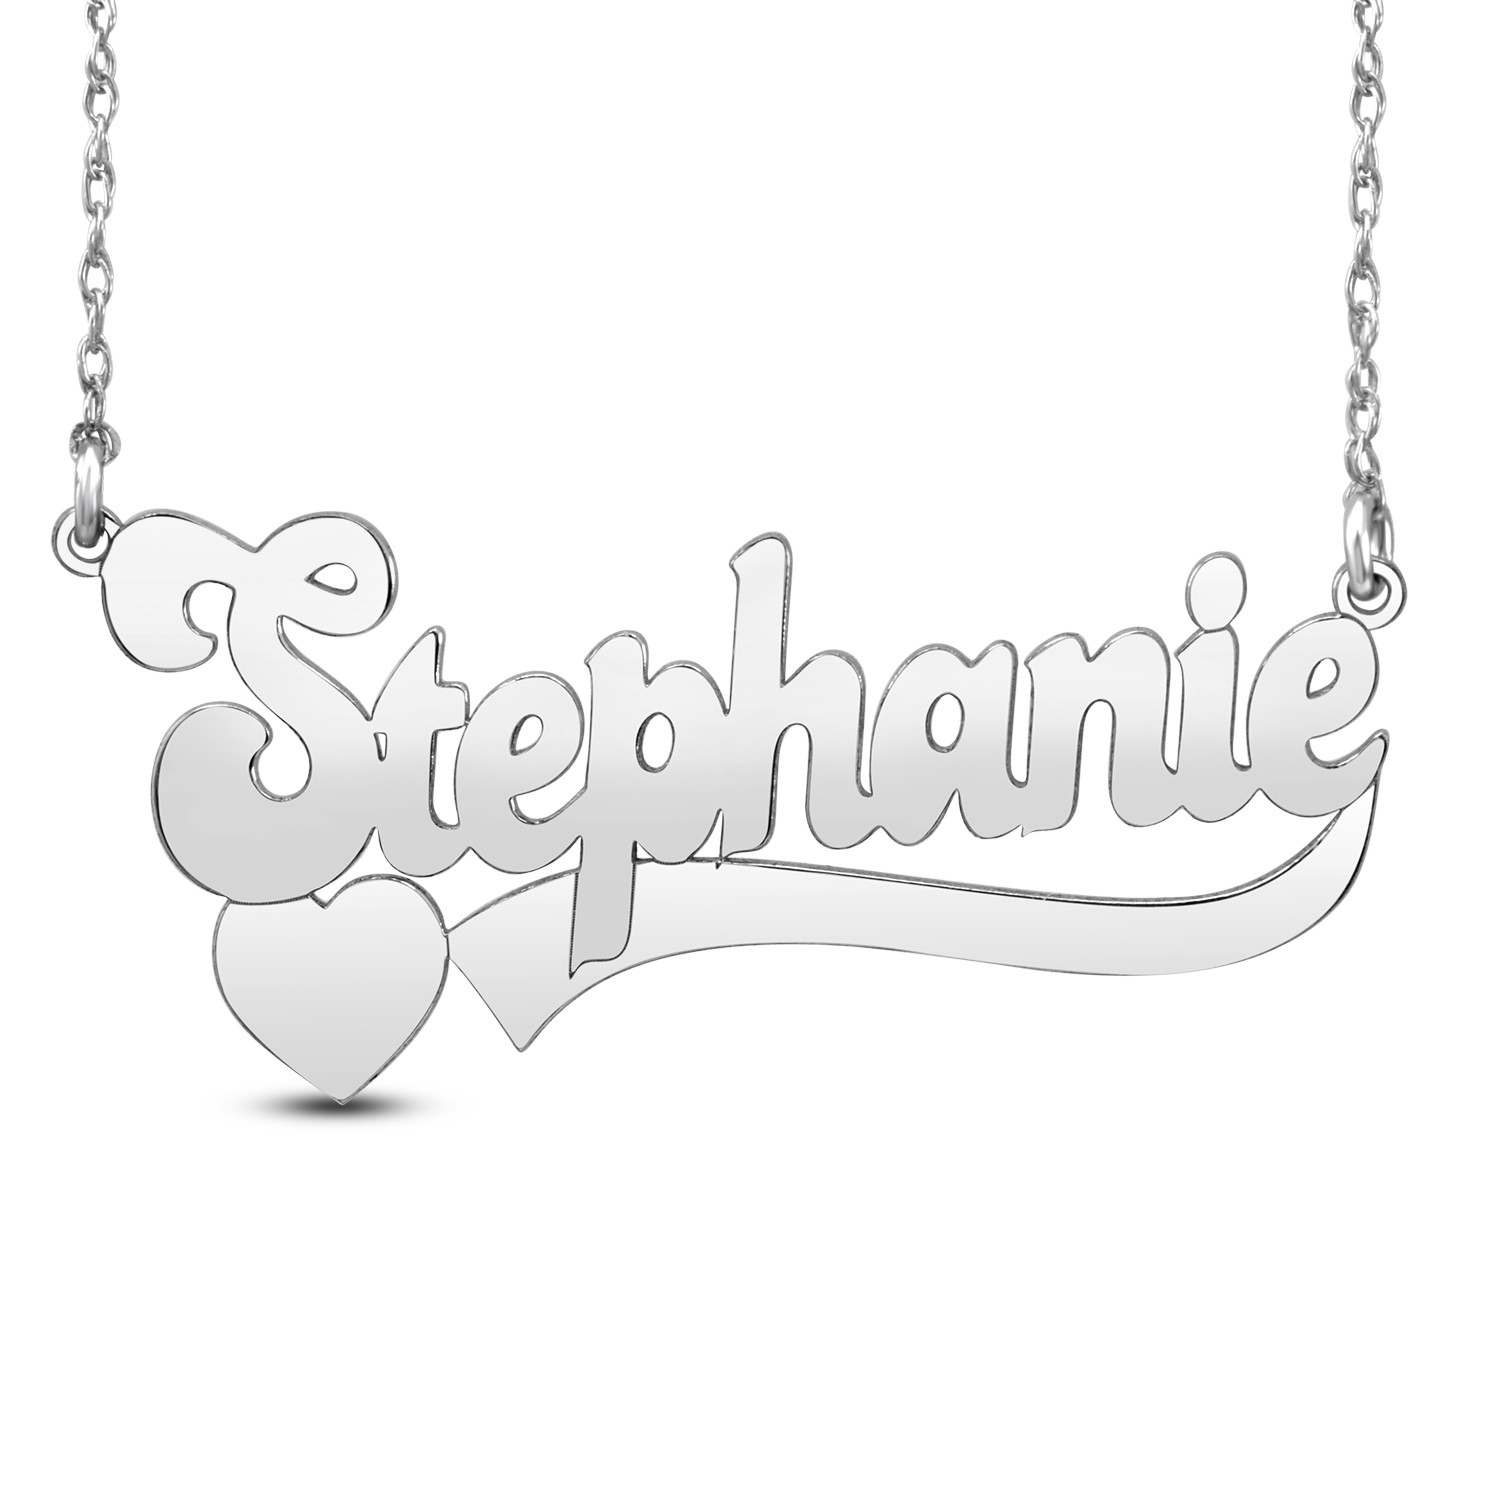 HI Polish Name Pers Necklace - 9 letter max 1 Uppercase letter (Example: Stephanie S=9.69mm x 1.2" e=4.85mm)